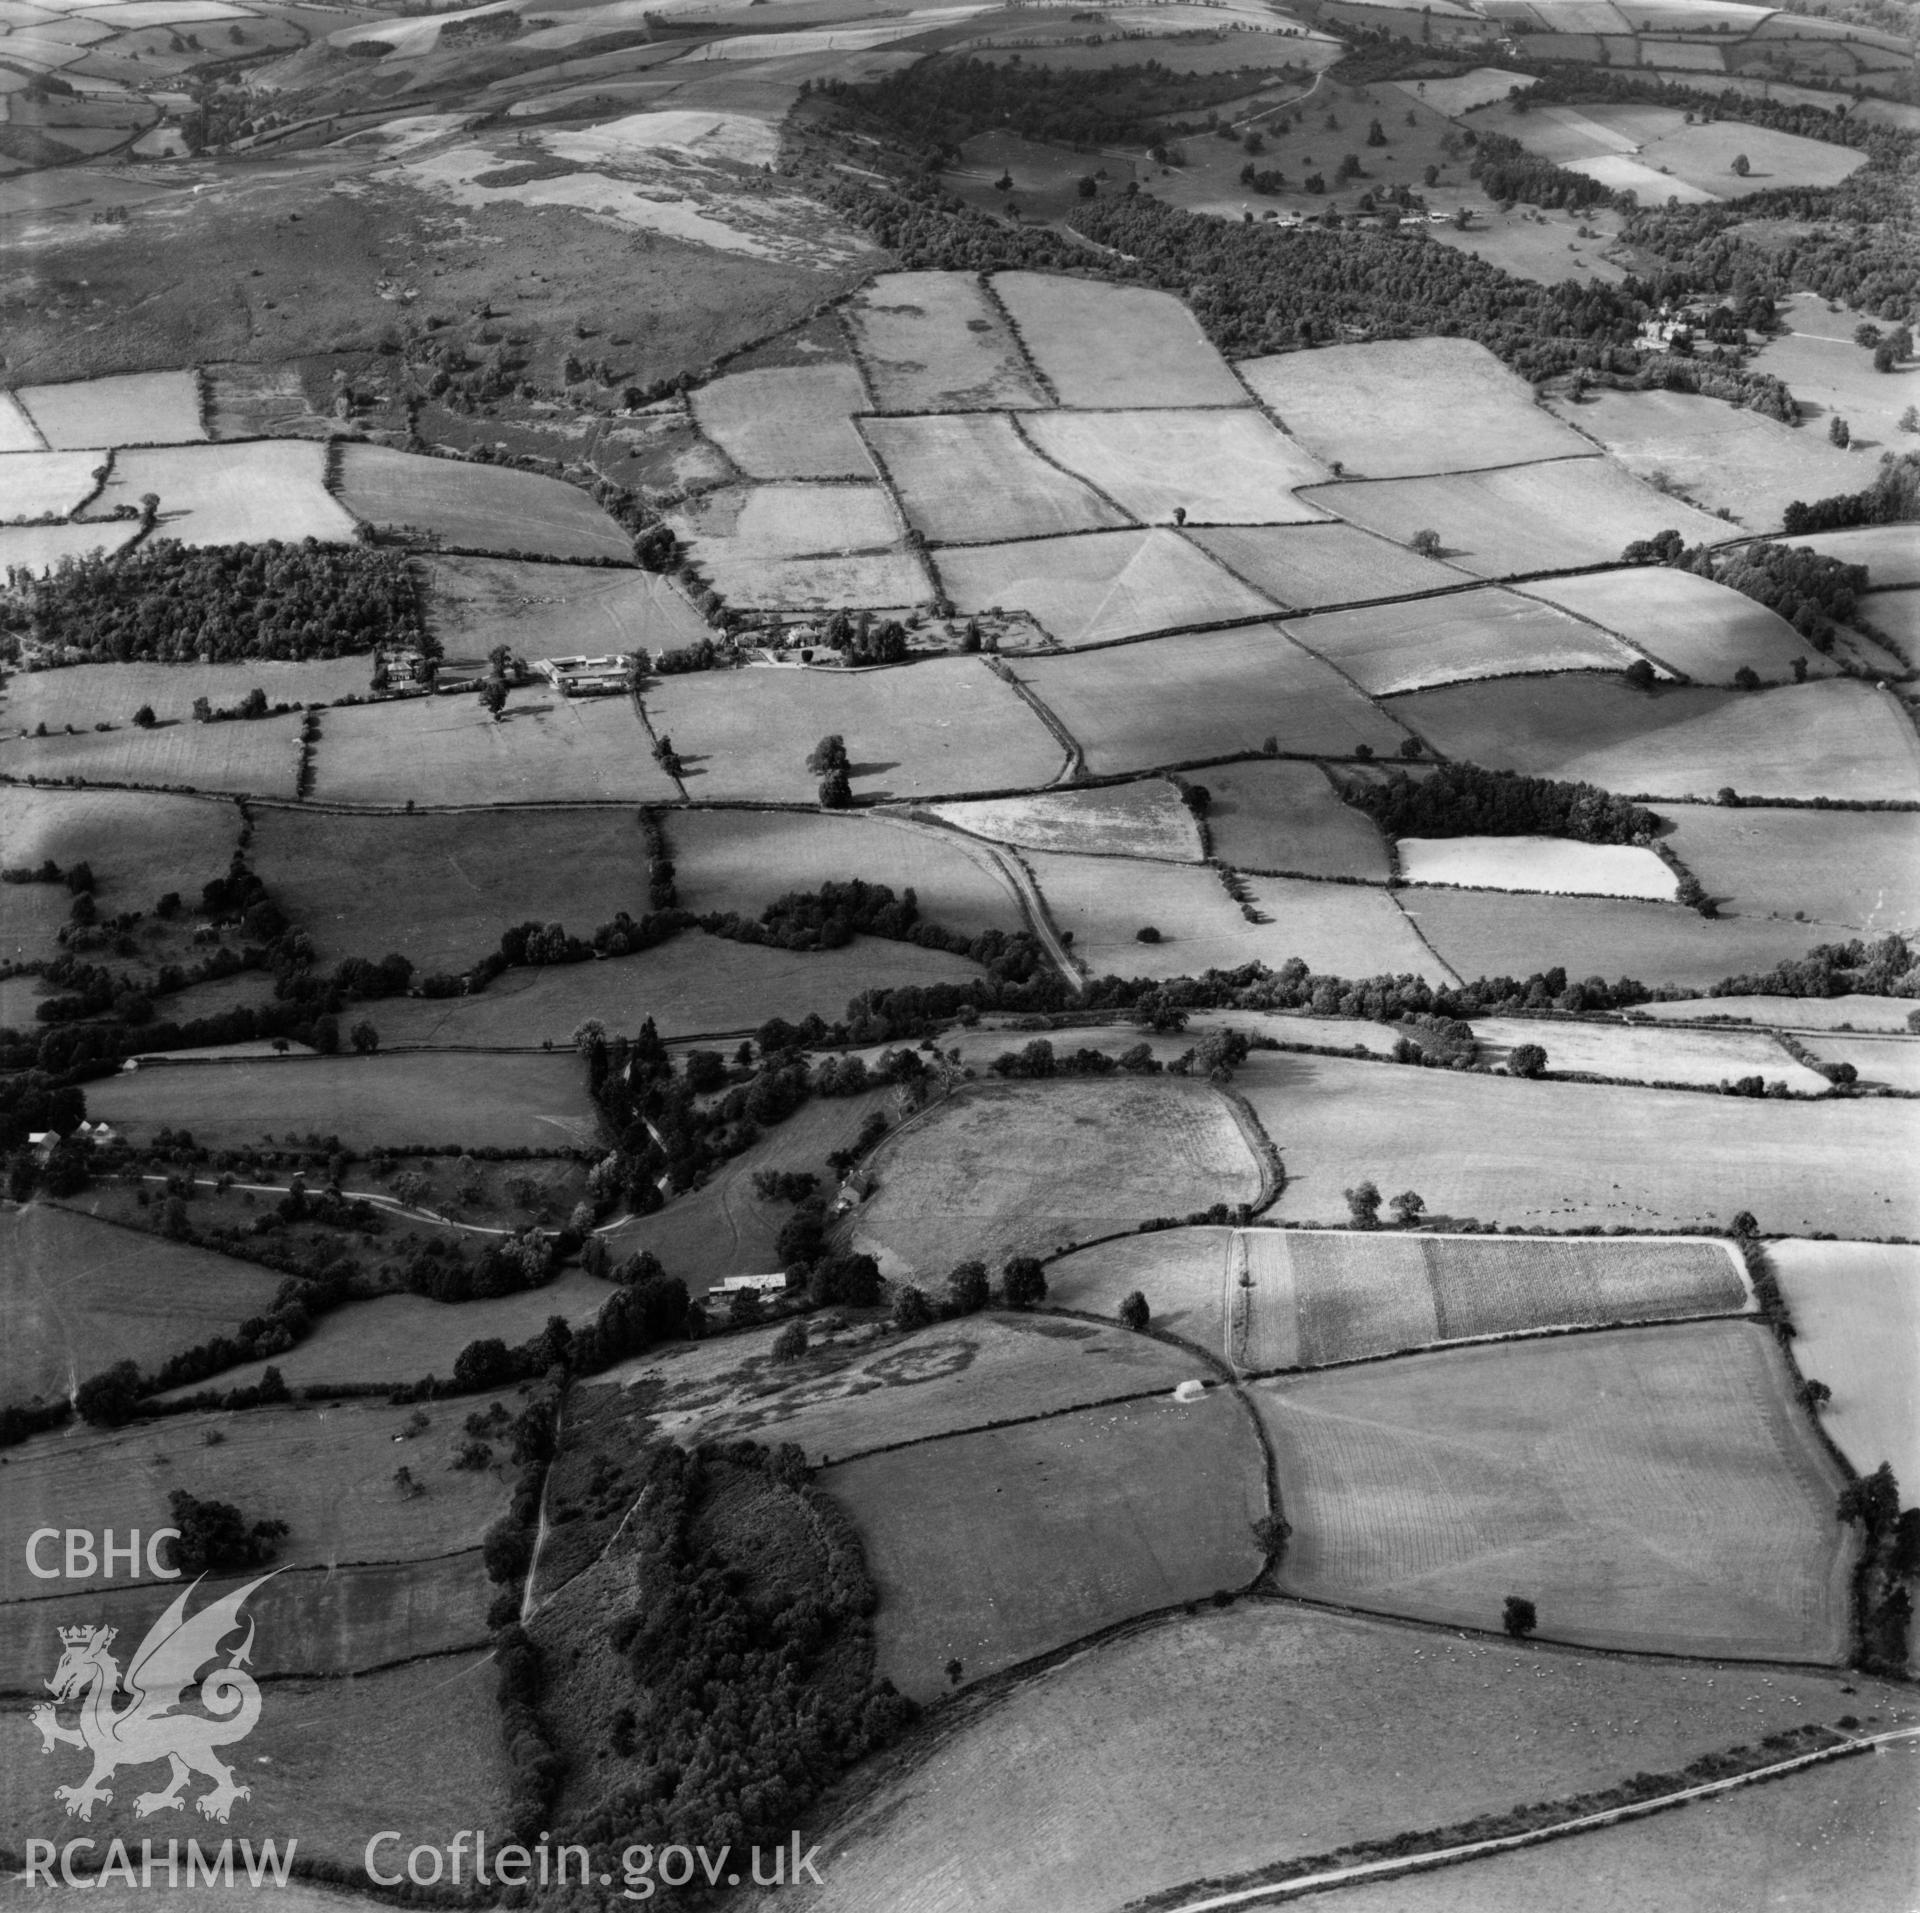 View of Rodd, Lugg Valley, looking west, commissioned by Lord Renner. Oblique aerial photograph, 5?" cut roll film.